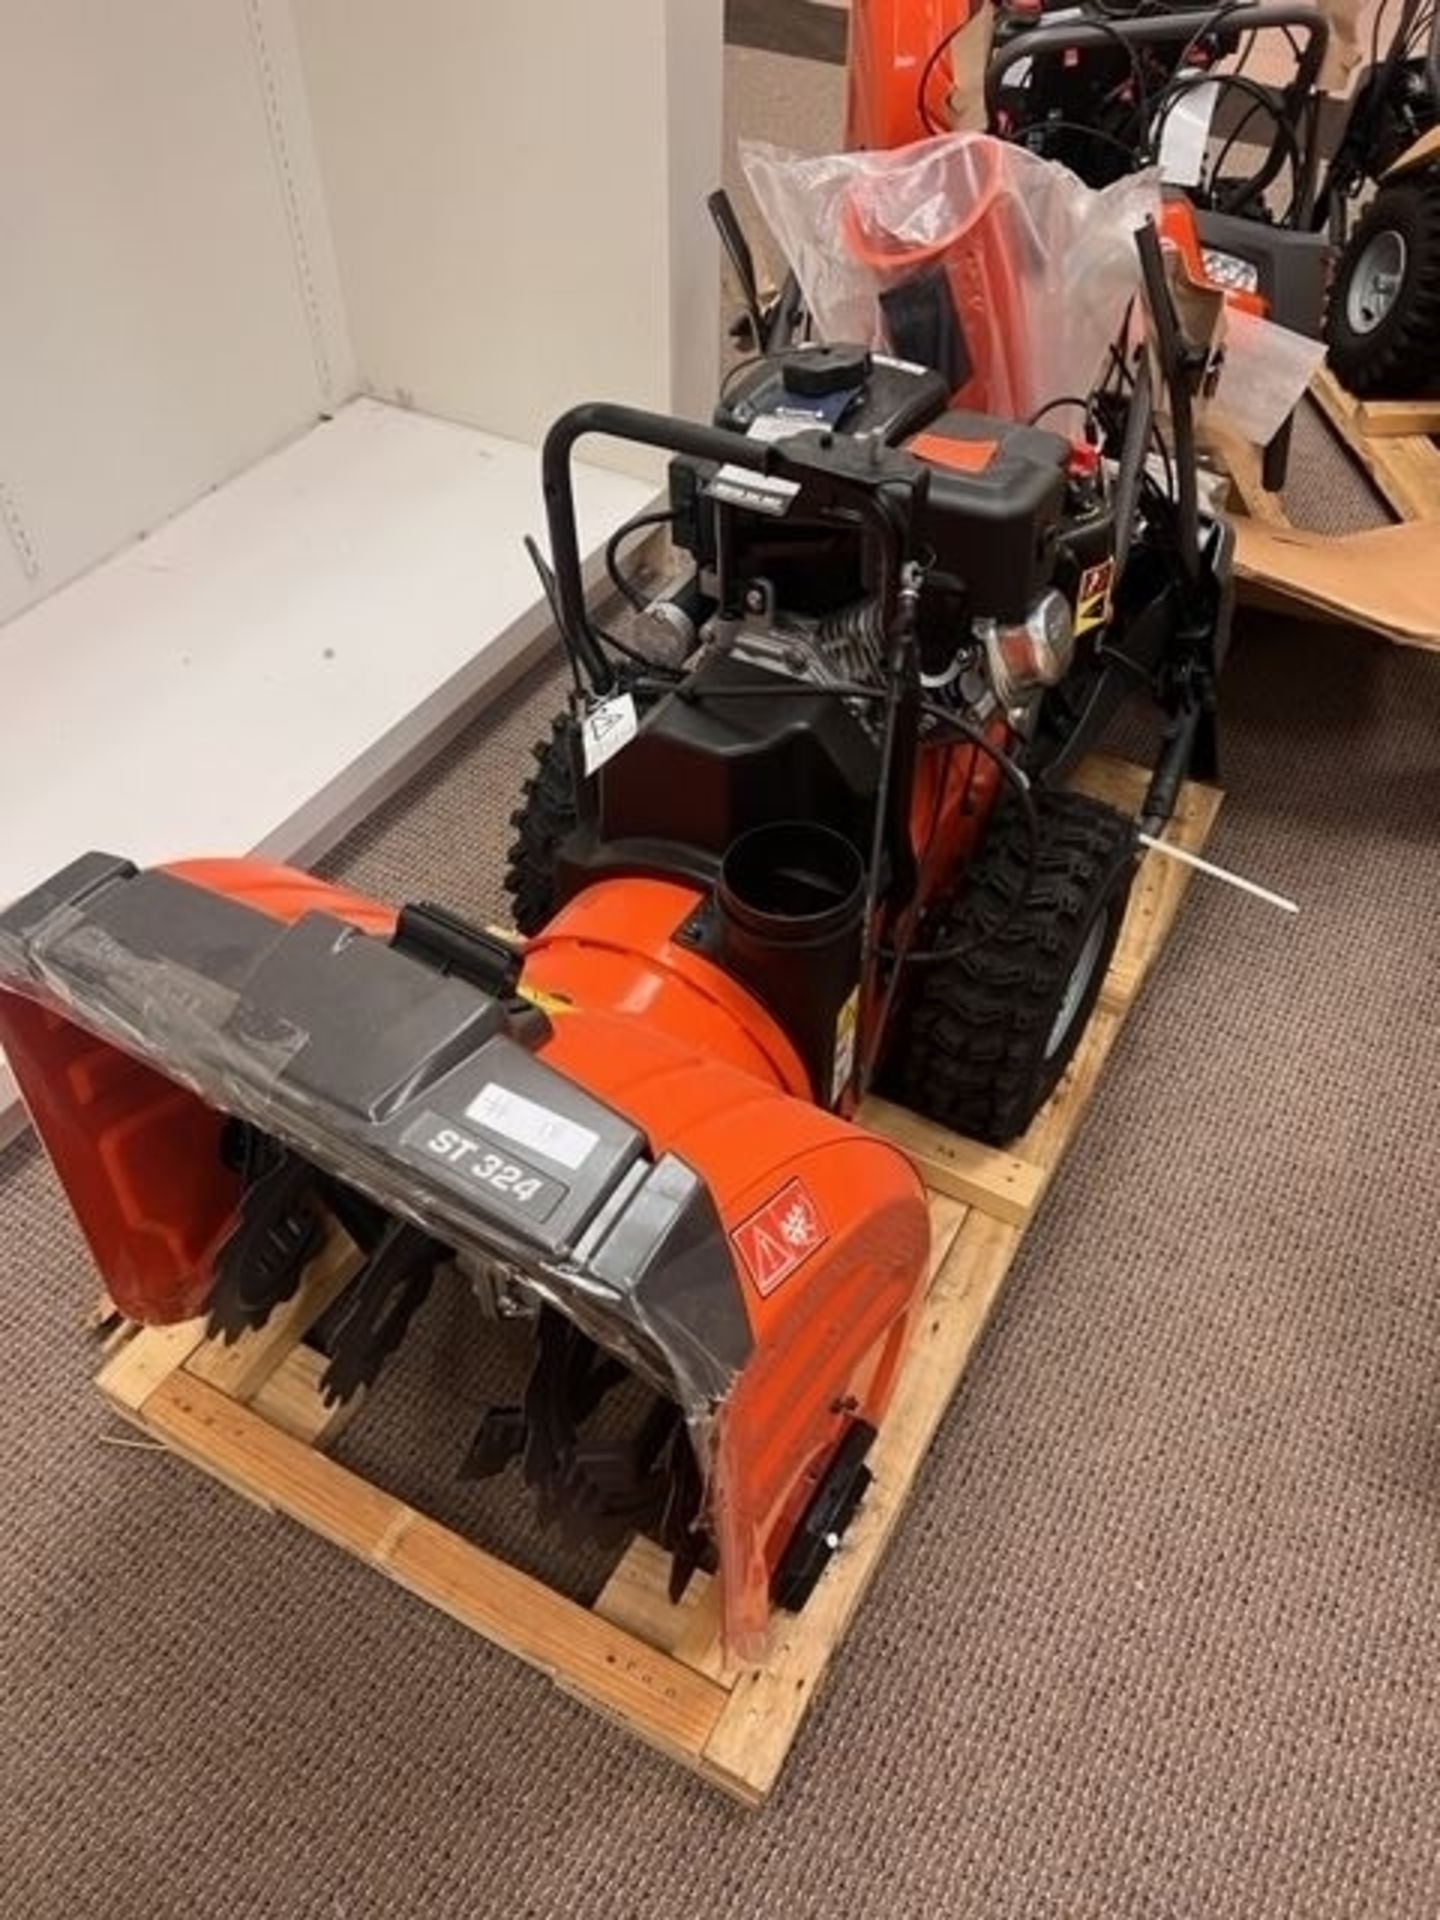 Husqvarna ST 324 Self Propelled Snow Blower - Approx. MSRP $1299 - Image 4 of 5